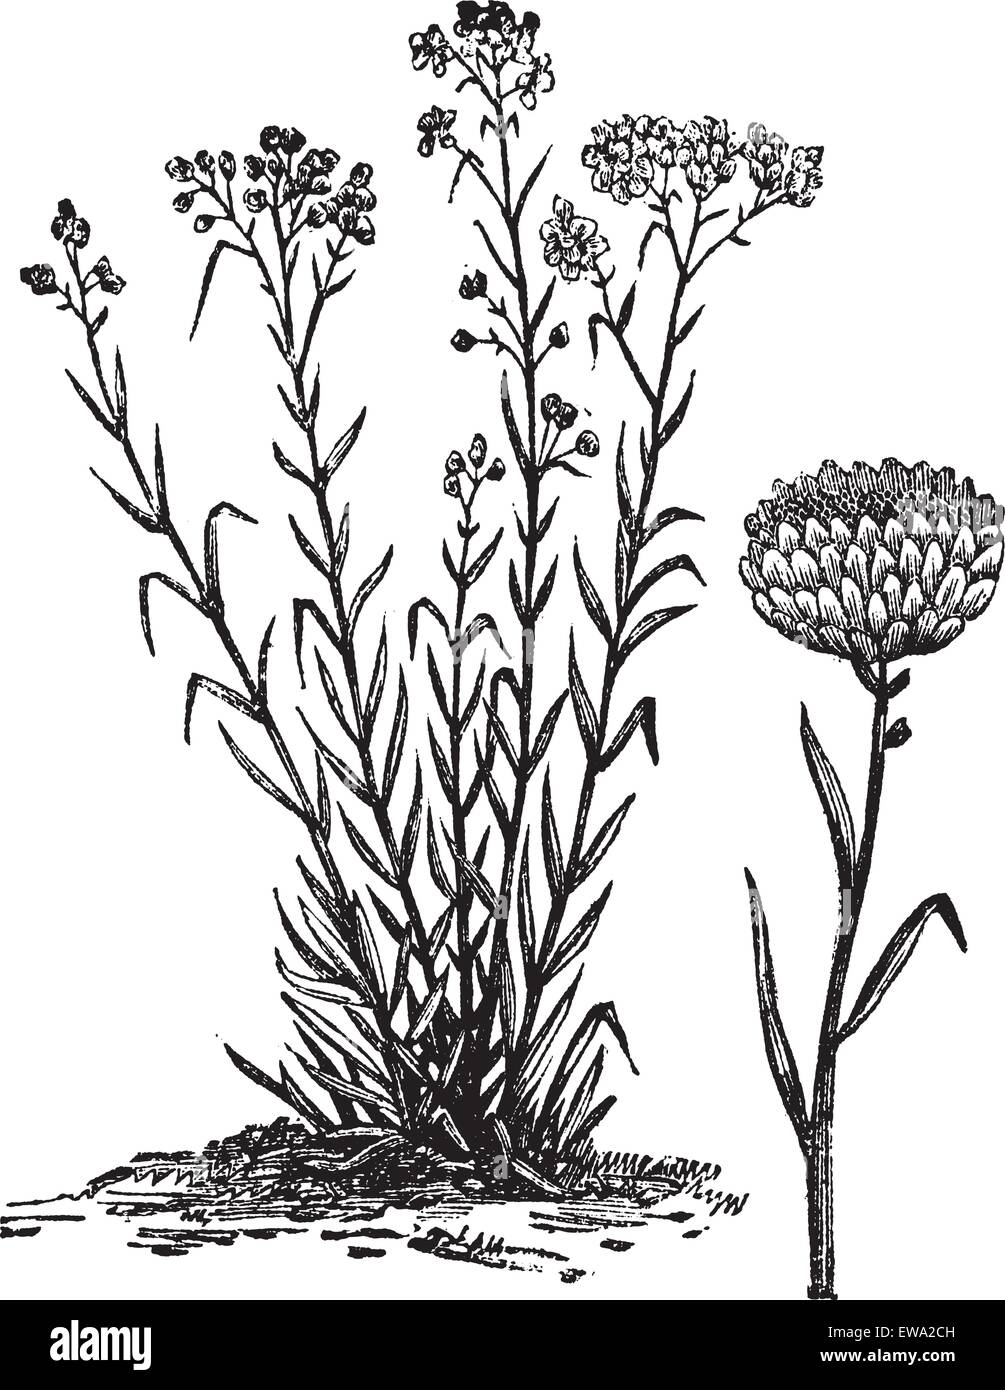 Helichrysum orientale, vintage engraving. Old engraved illustration of Helichrysum orientale with isolated flower on a white background. Stock Vector